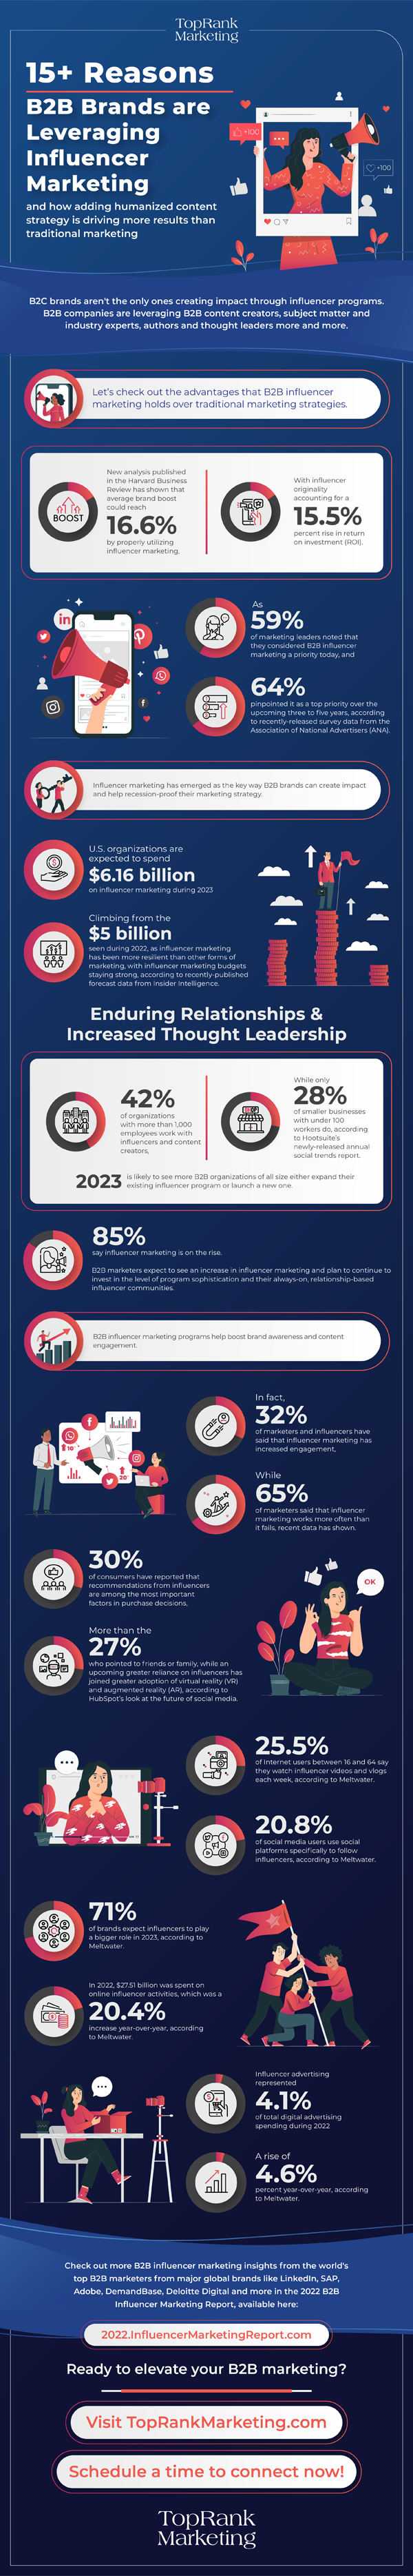 15+ reasons B2B brands are leveraging influencer marketing infographic